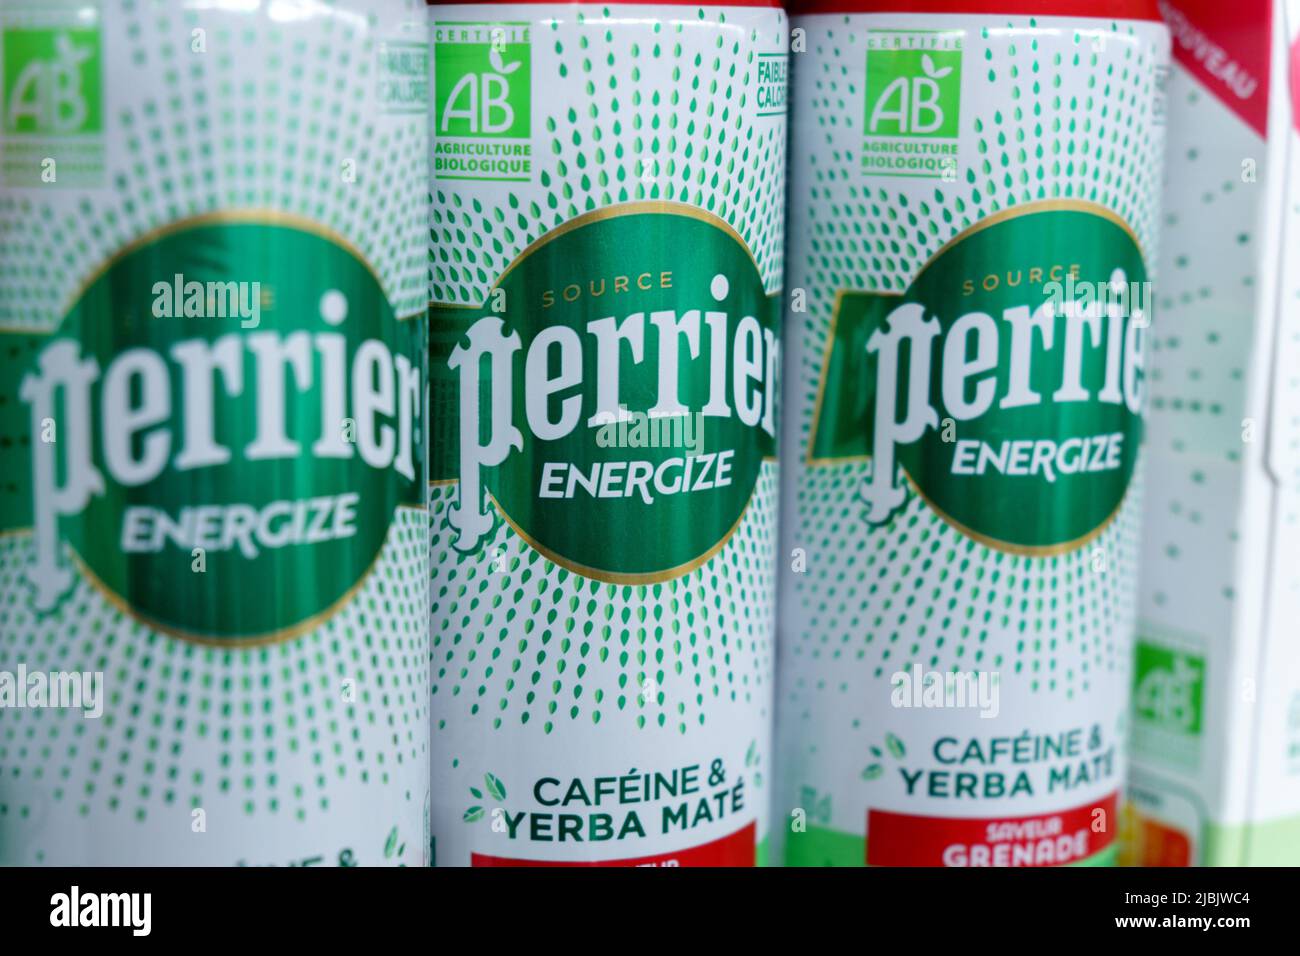 Tyumen, Russia-May 11, 2022: Mineral water bottles Perrier energize cofeine yerba mate. French brand of premium mineral water. Selling in the hypermar Stock Photo